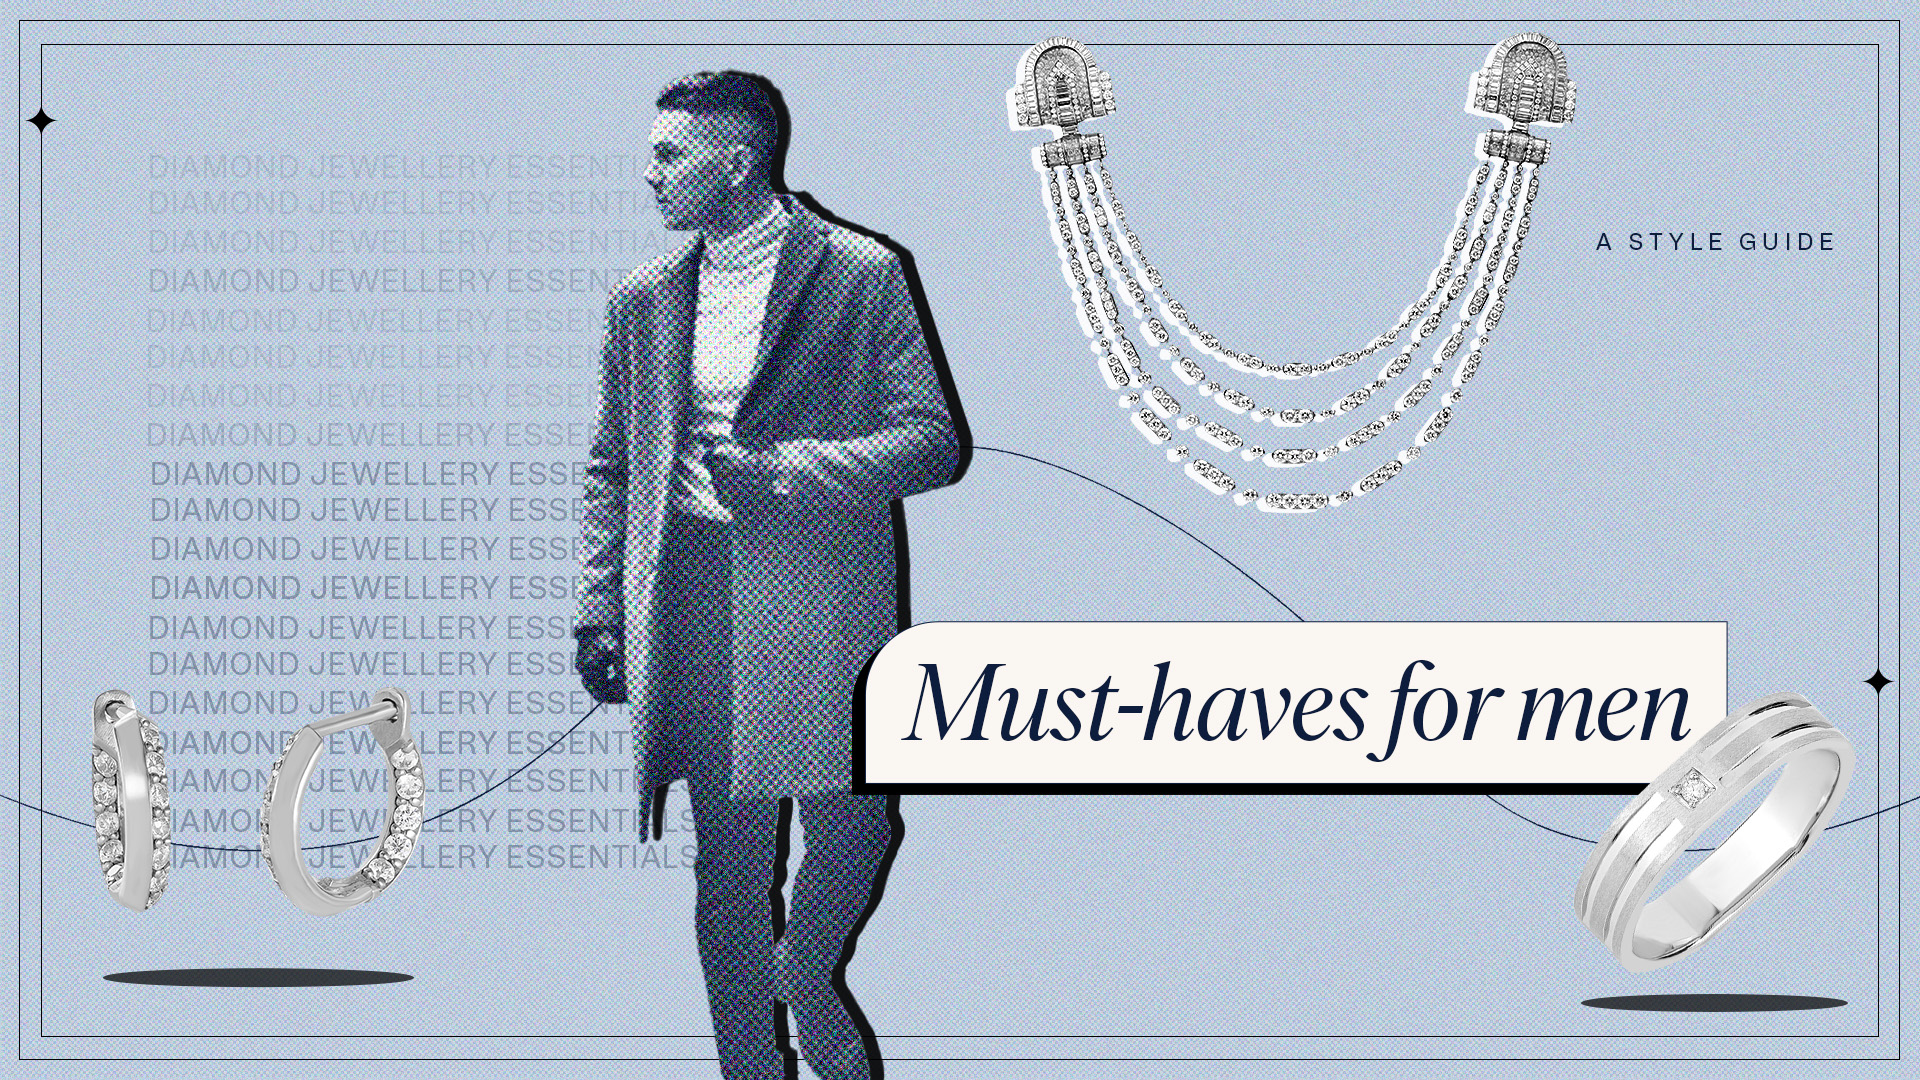 5 Diamond Jewellery Must-haves for Men - Only Natural Diamonds 5 Ultimate  Diamond Jewellery Must-Haves for Men– Only Natural Diamonds